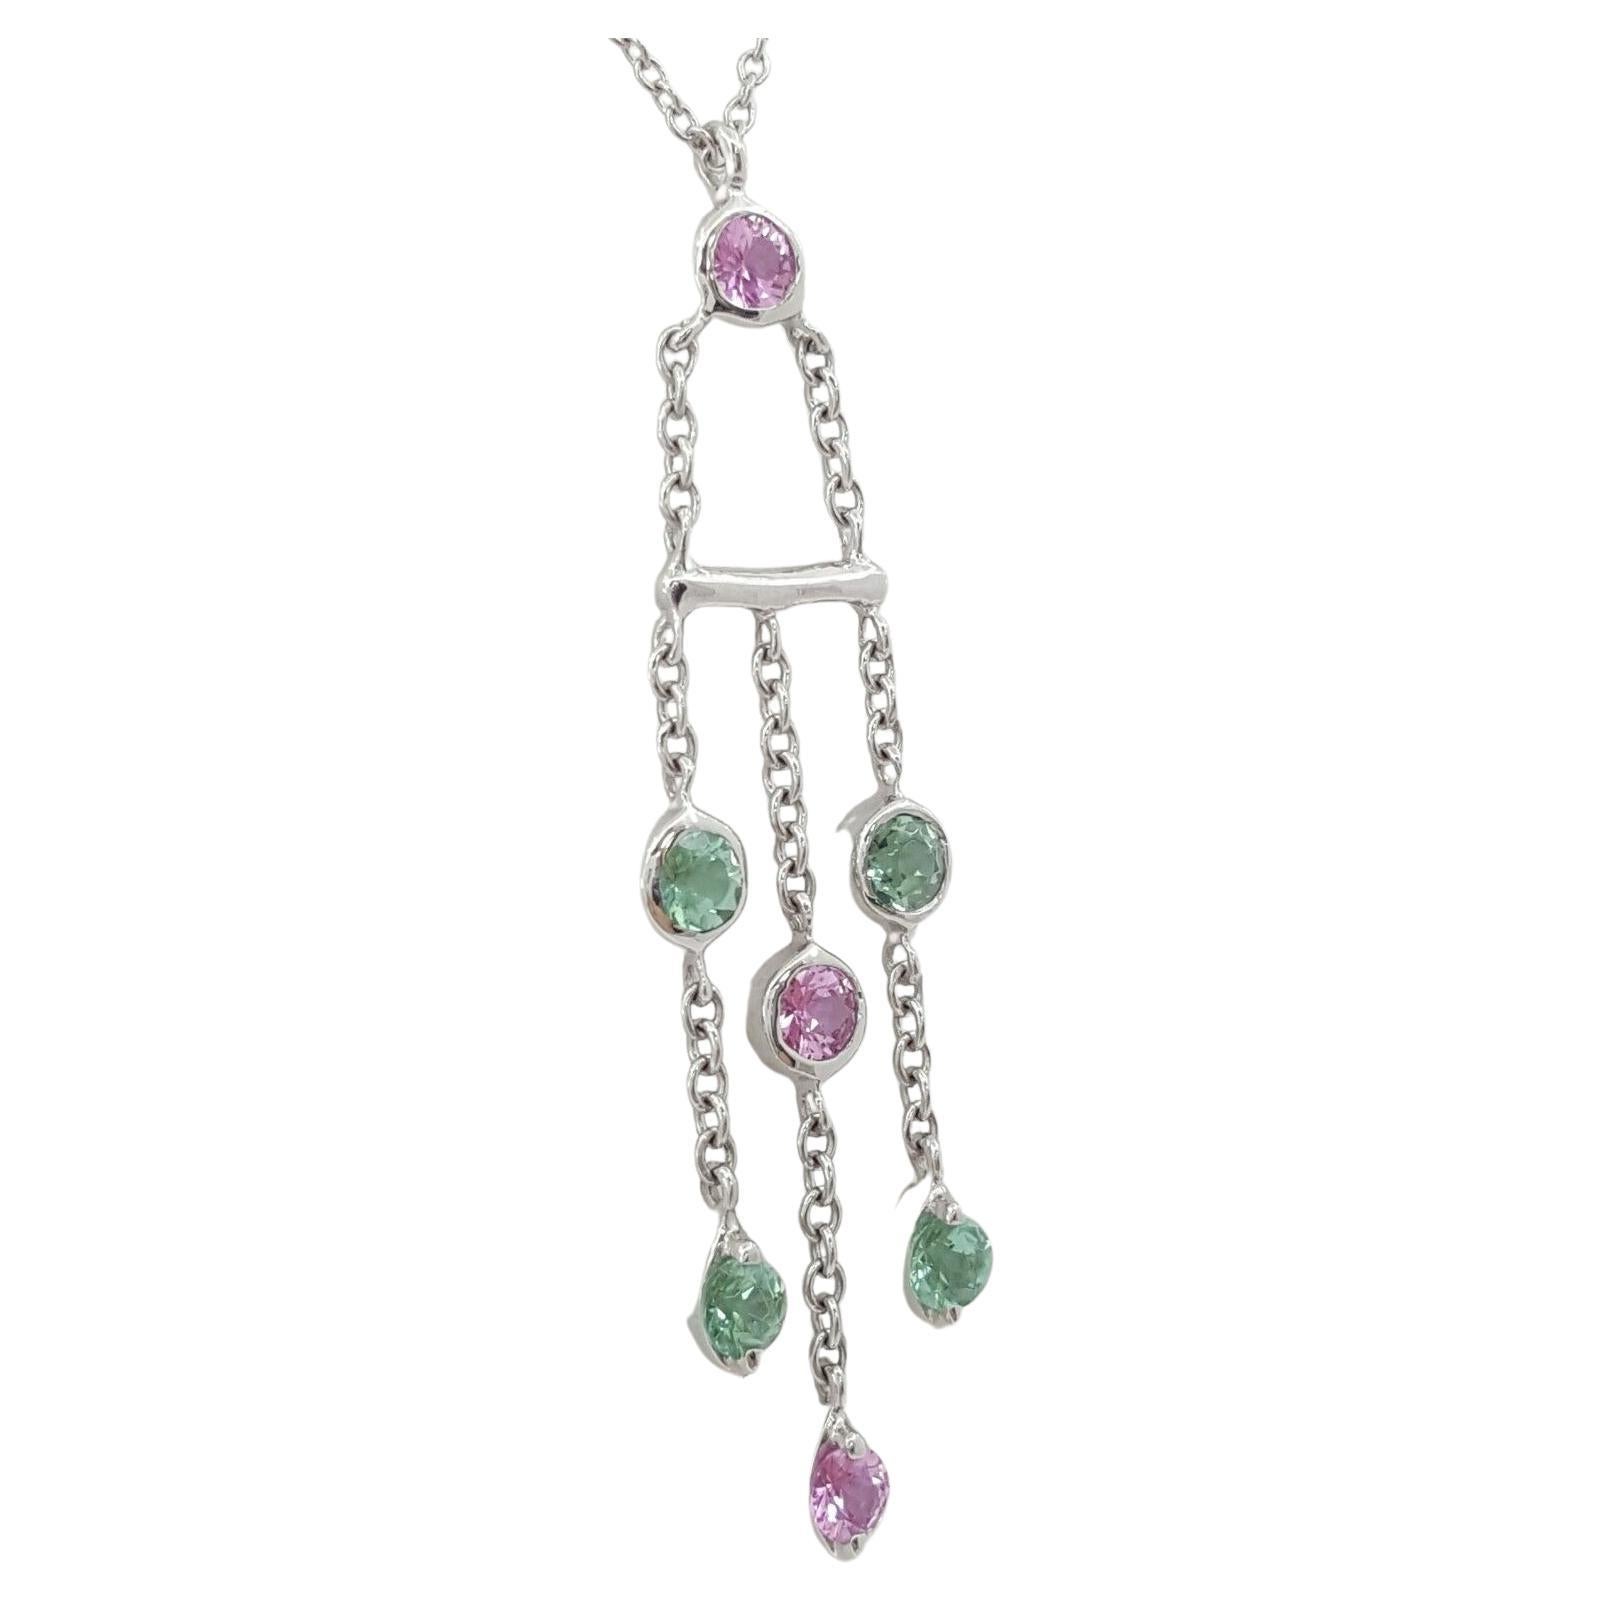 Authentic Tiffany & Co. 18K White Gold 0.80 ct Total Weight Multicolor Round Brilliant Cut Pink Sapphire & Green Tourmaline Fringe Pendant / Necklace 16